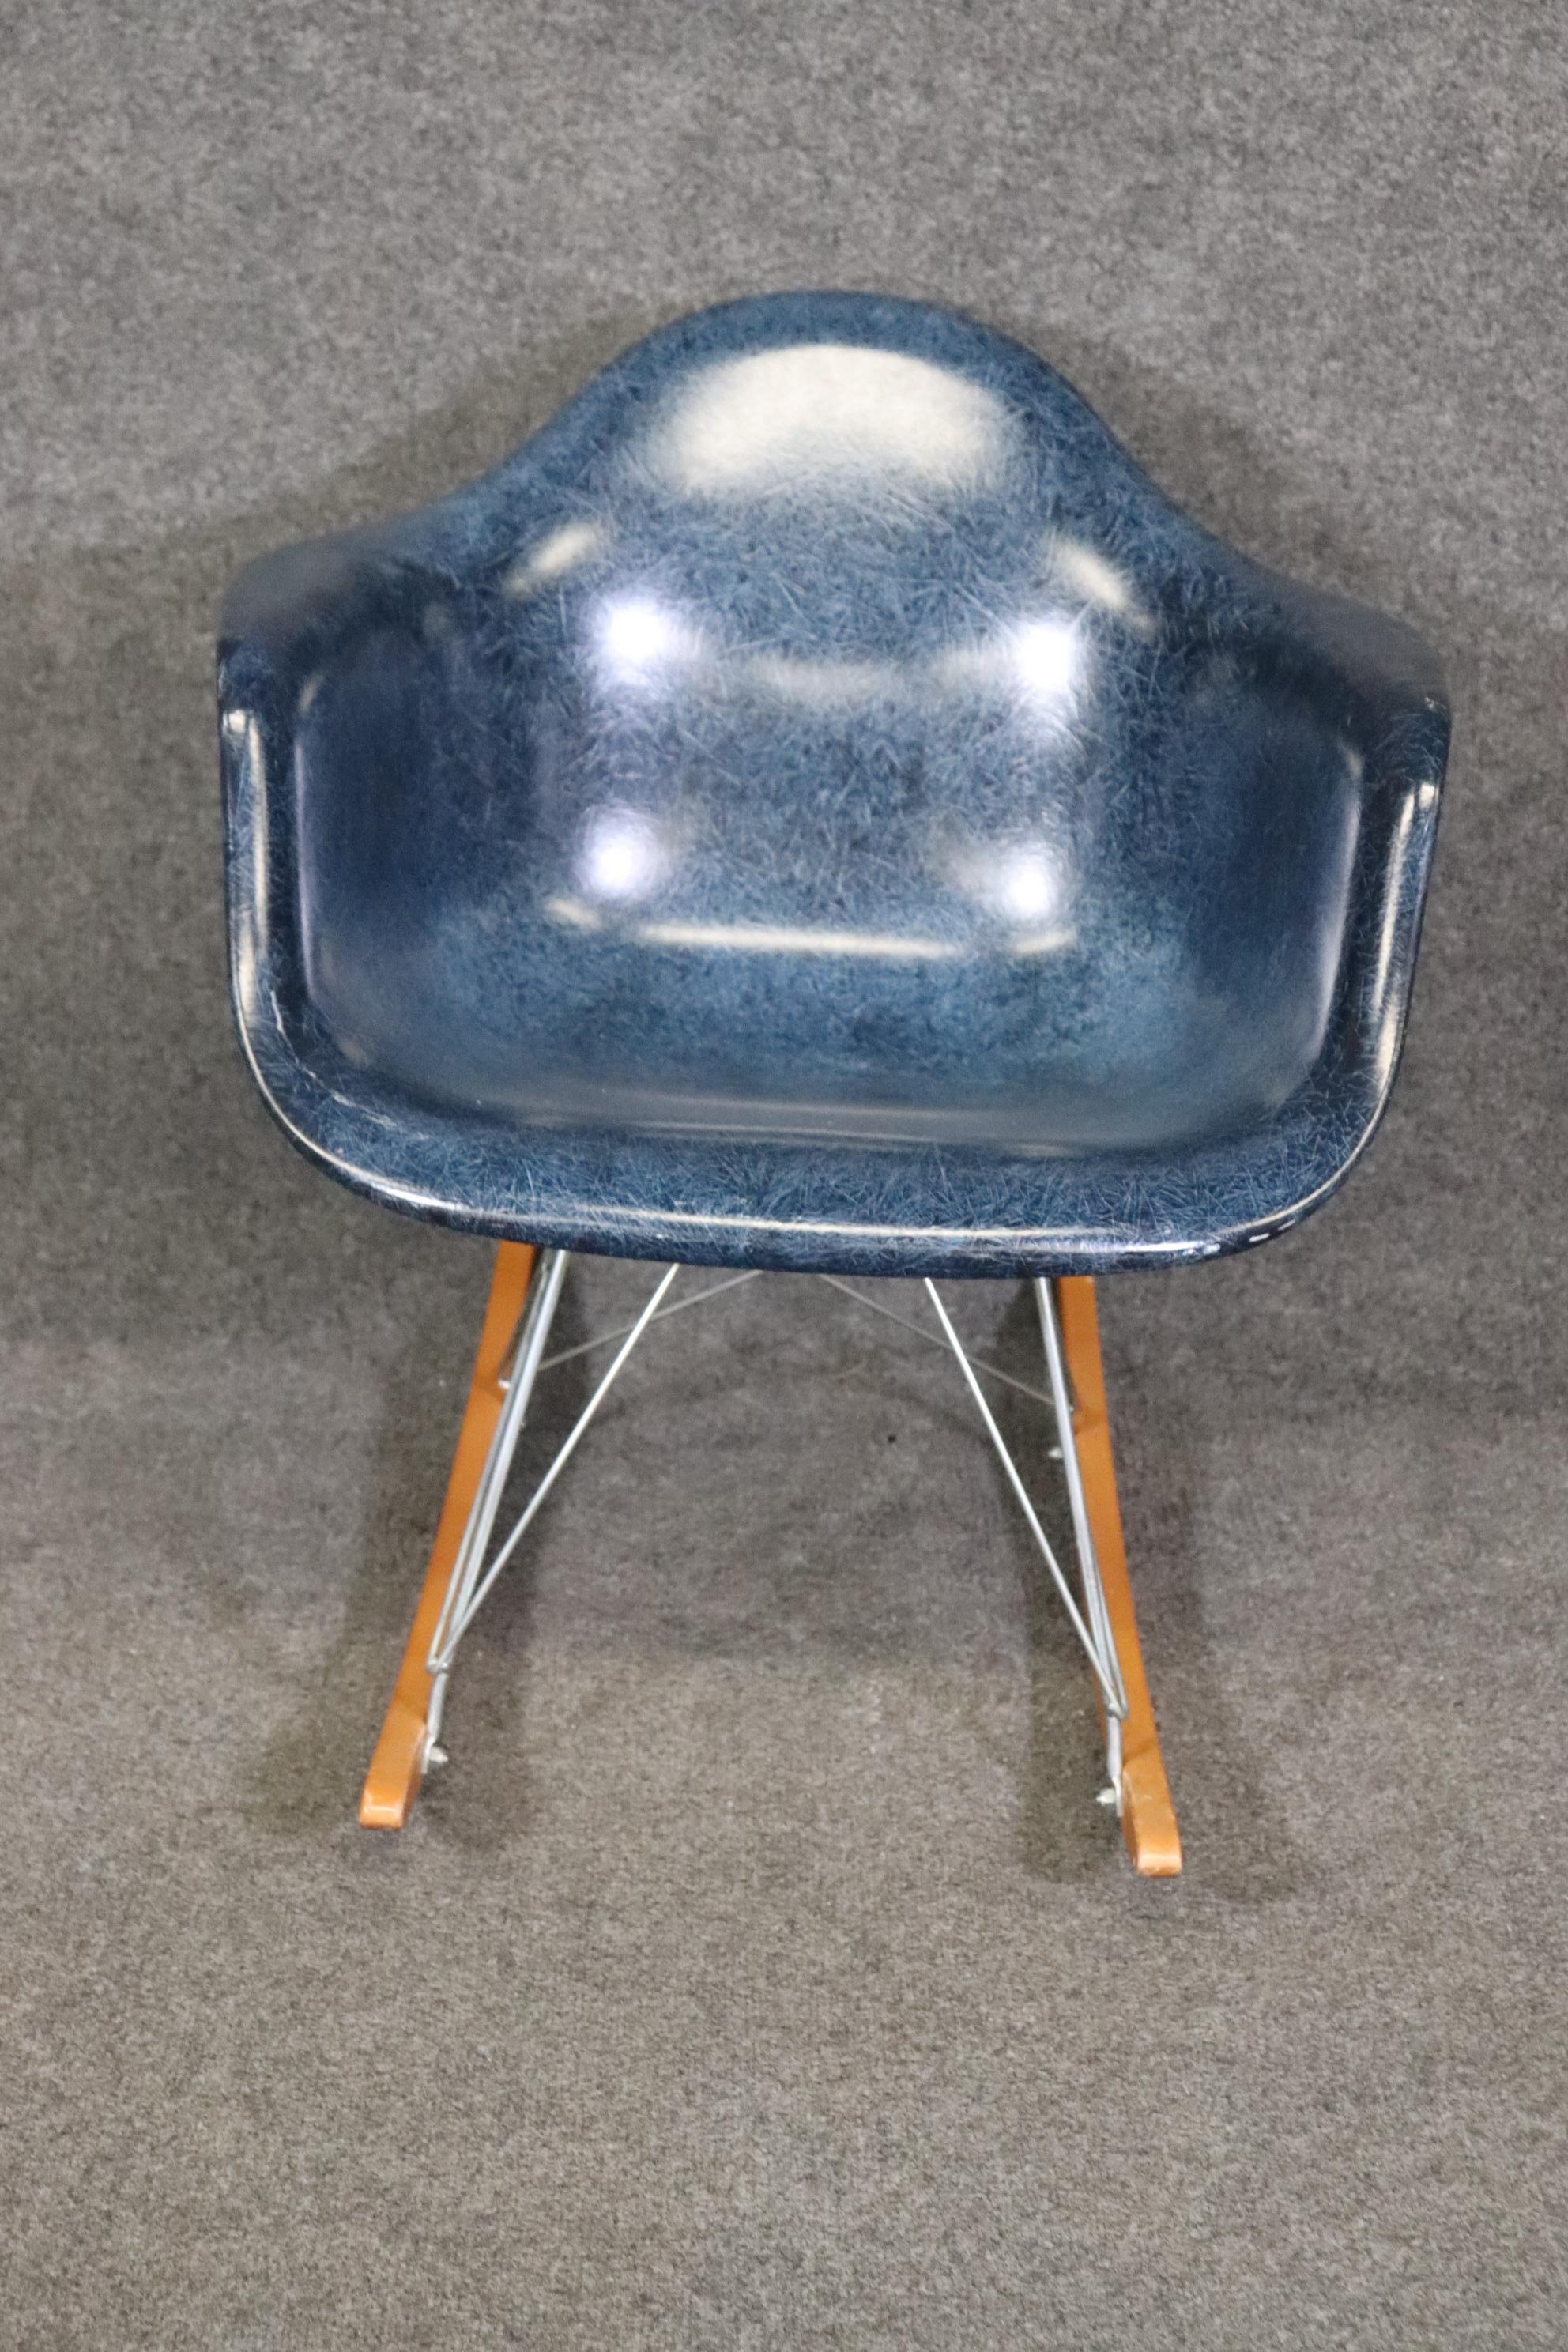 Dimensions- H: 27 1/2in W: 25in D: 27 1/4in SH: 17 1/2in

This Eames for Modernica rocking chair is a piece of art!  If you look at the photos provided, you can see the molded fiberglass chair with waterfall seat supported by a metal frame on walnut